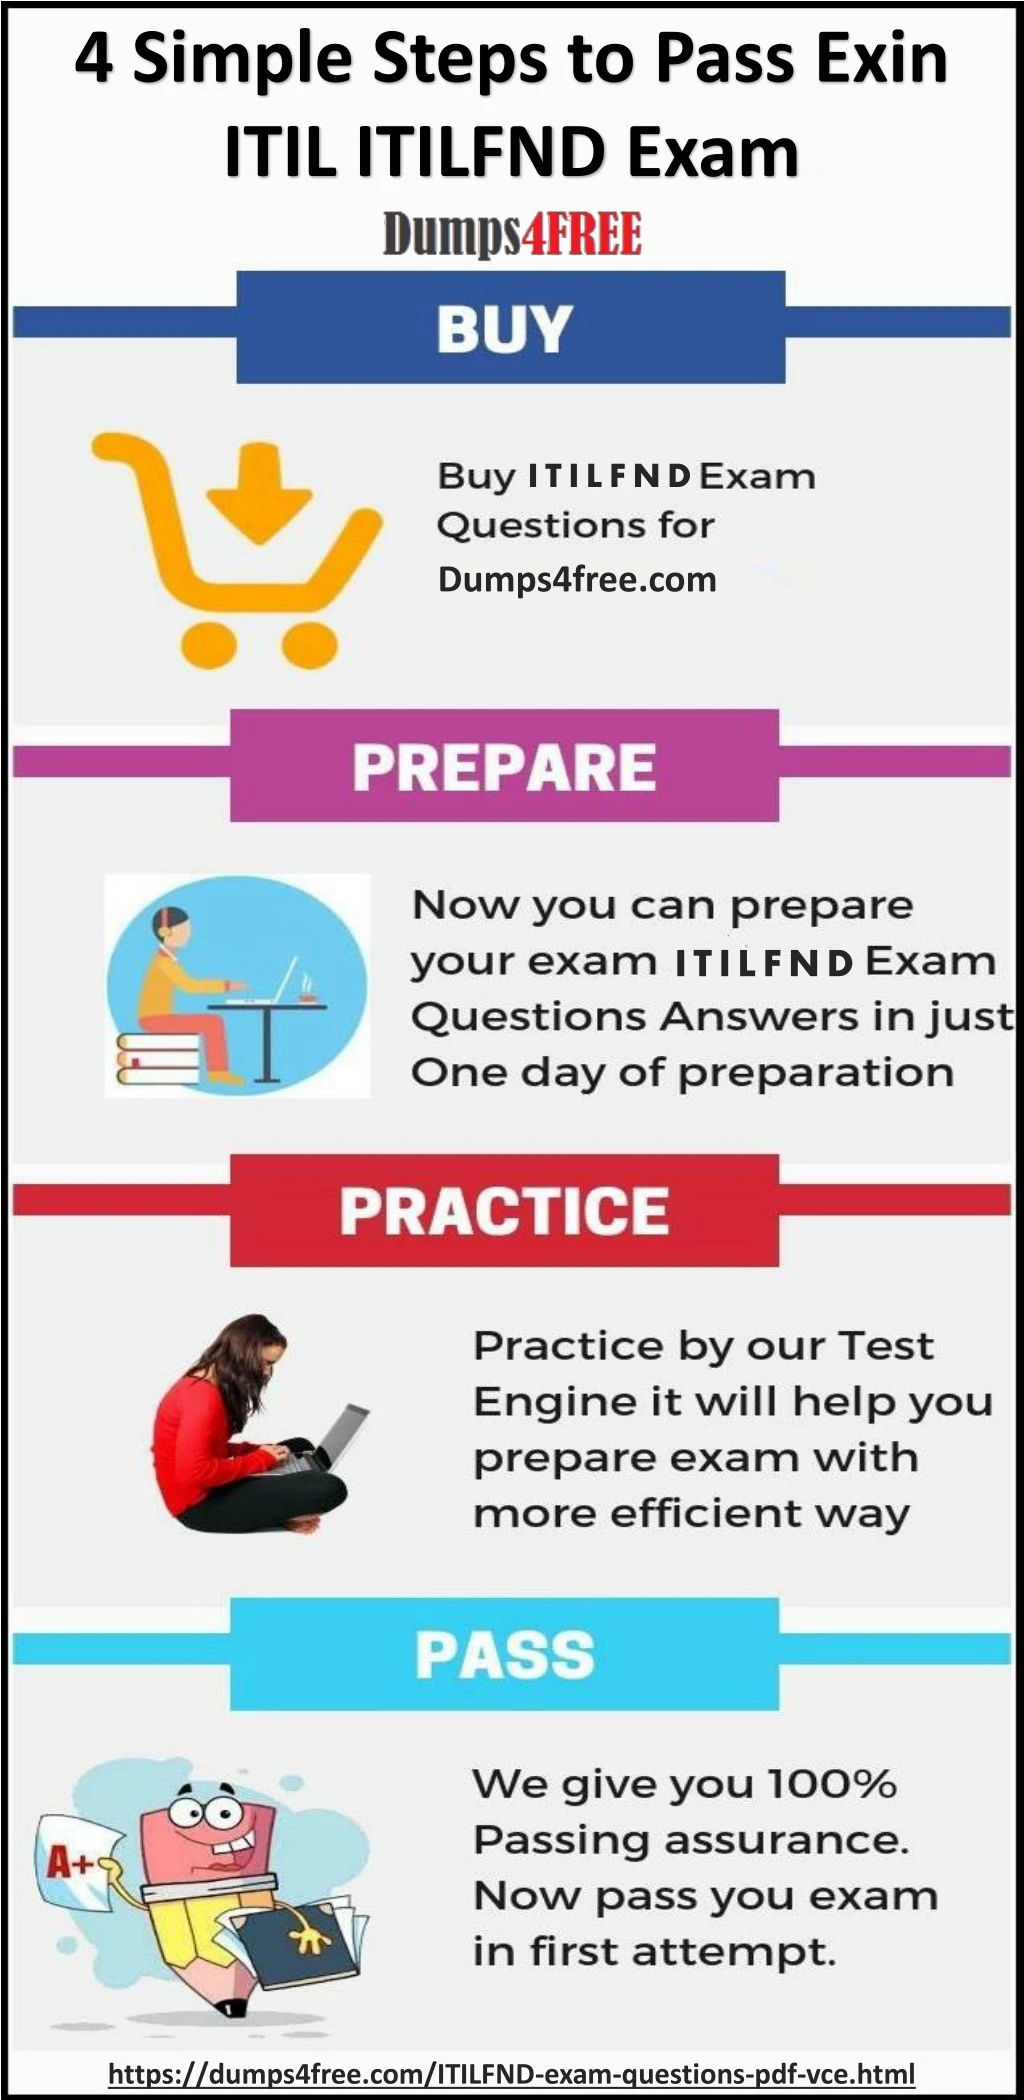 4 simple steps to pass exin itil itilfnd exam